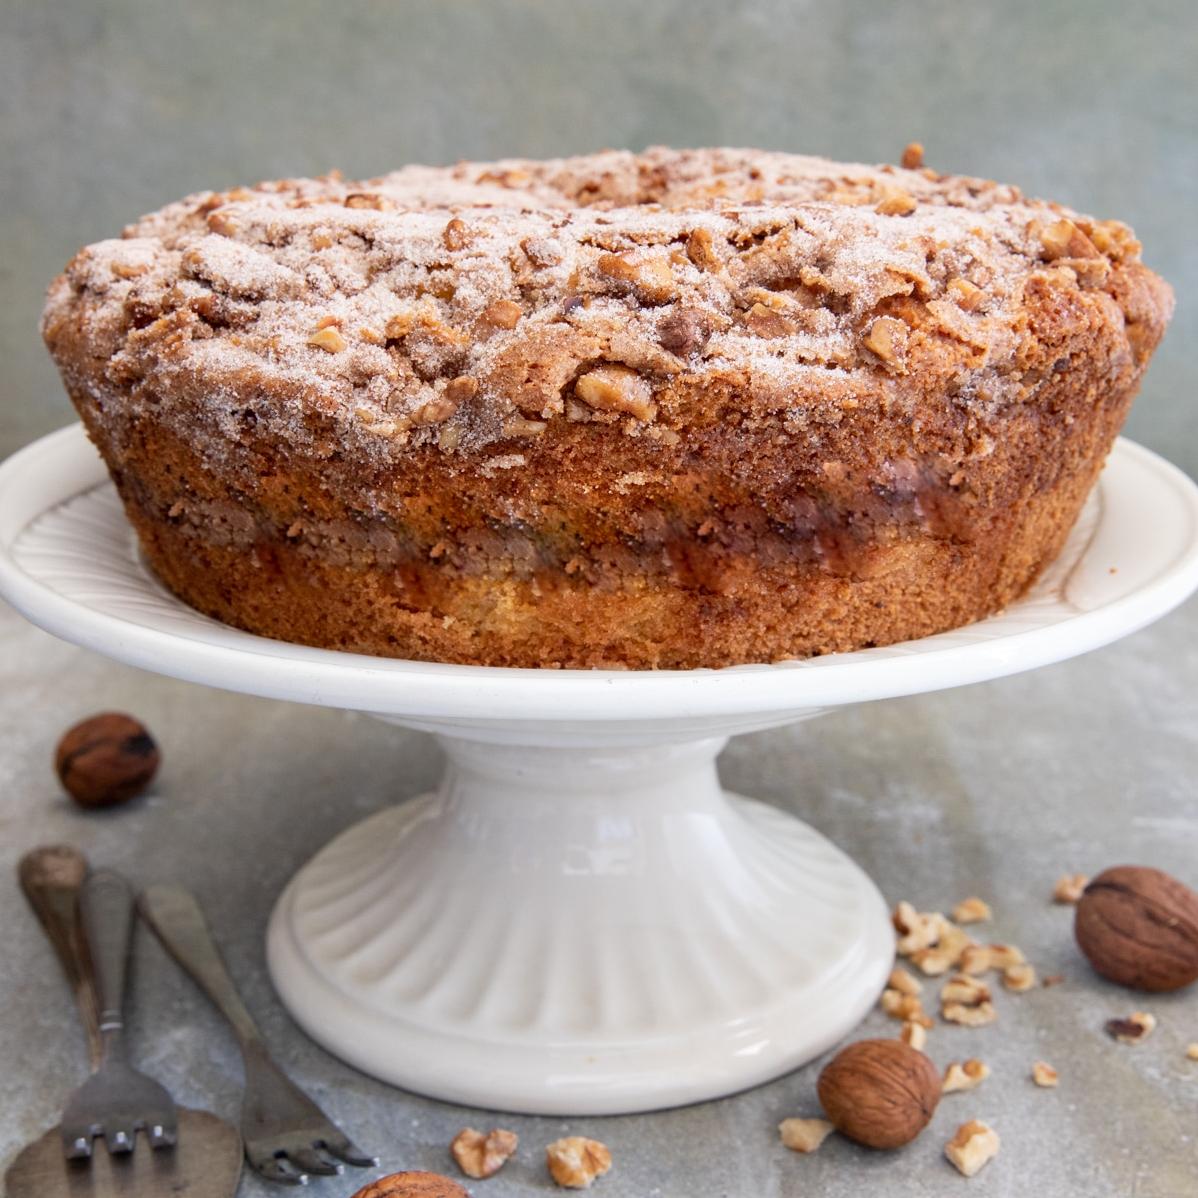  Rich and indulgent, this coffee cake is the perfect treat for any occasion.